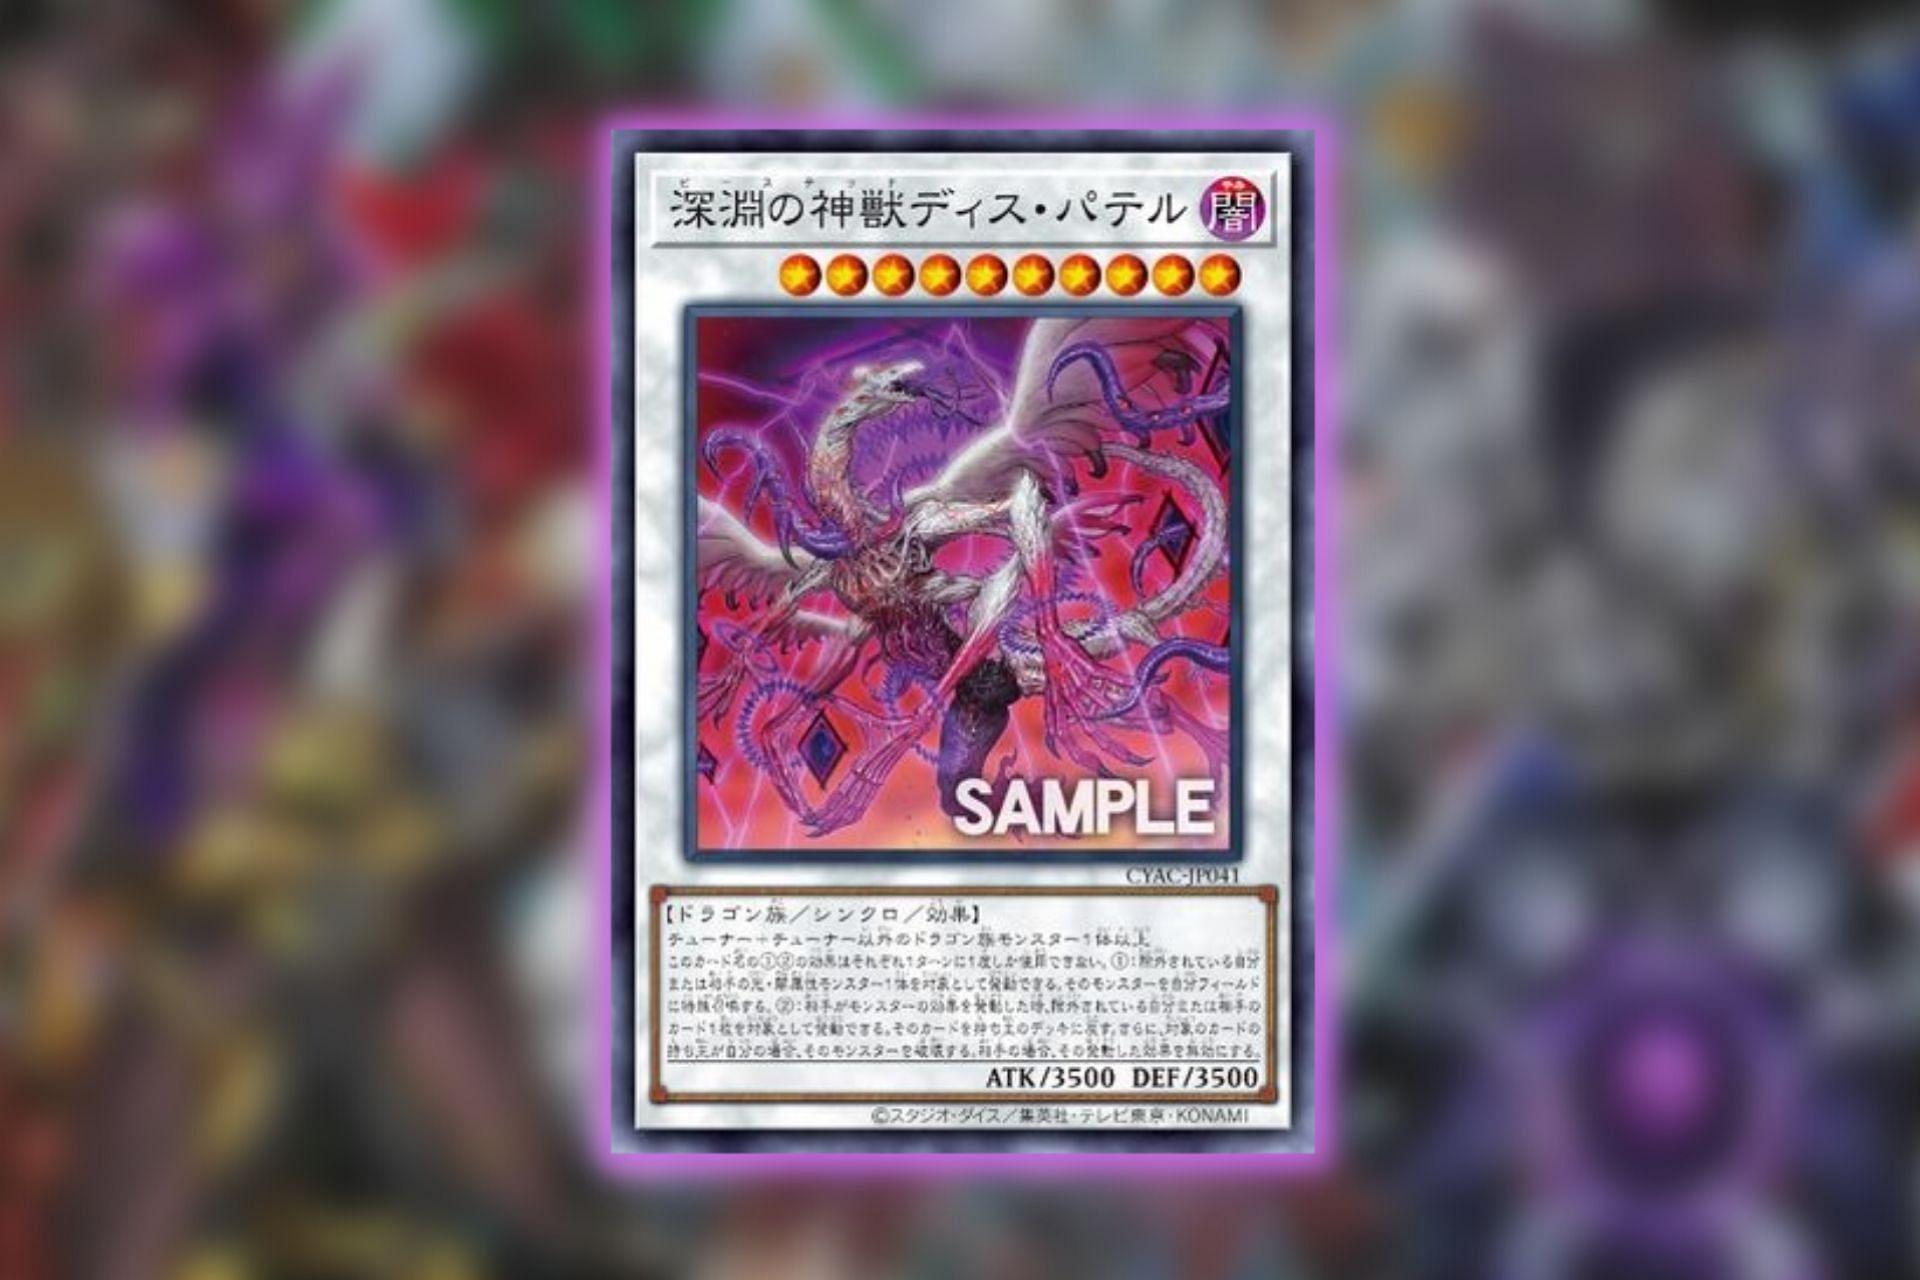 Cyberstorm Access is going to feature some truly powerful cards, like Yu-Gi-Oh! monster Bystial Dis Pater.